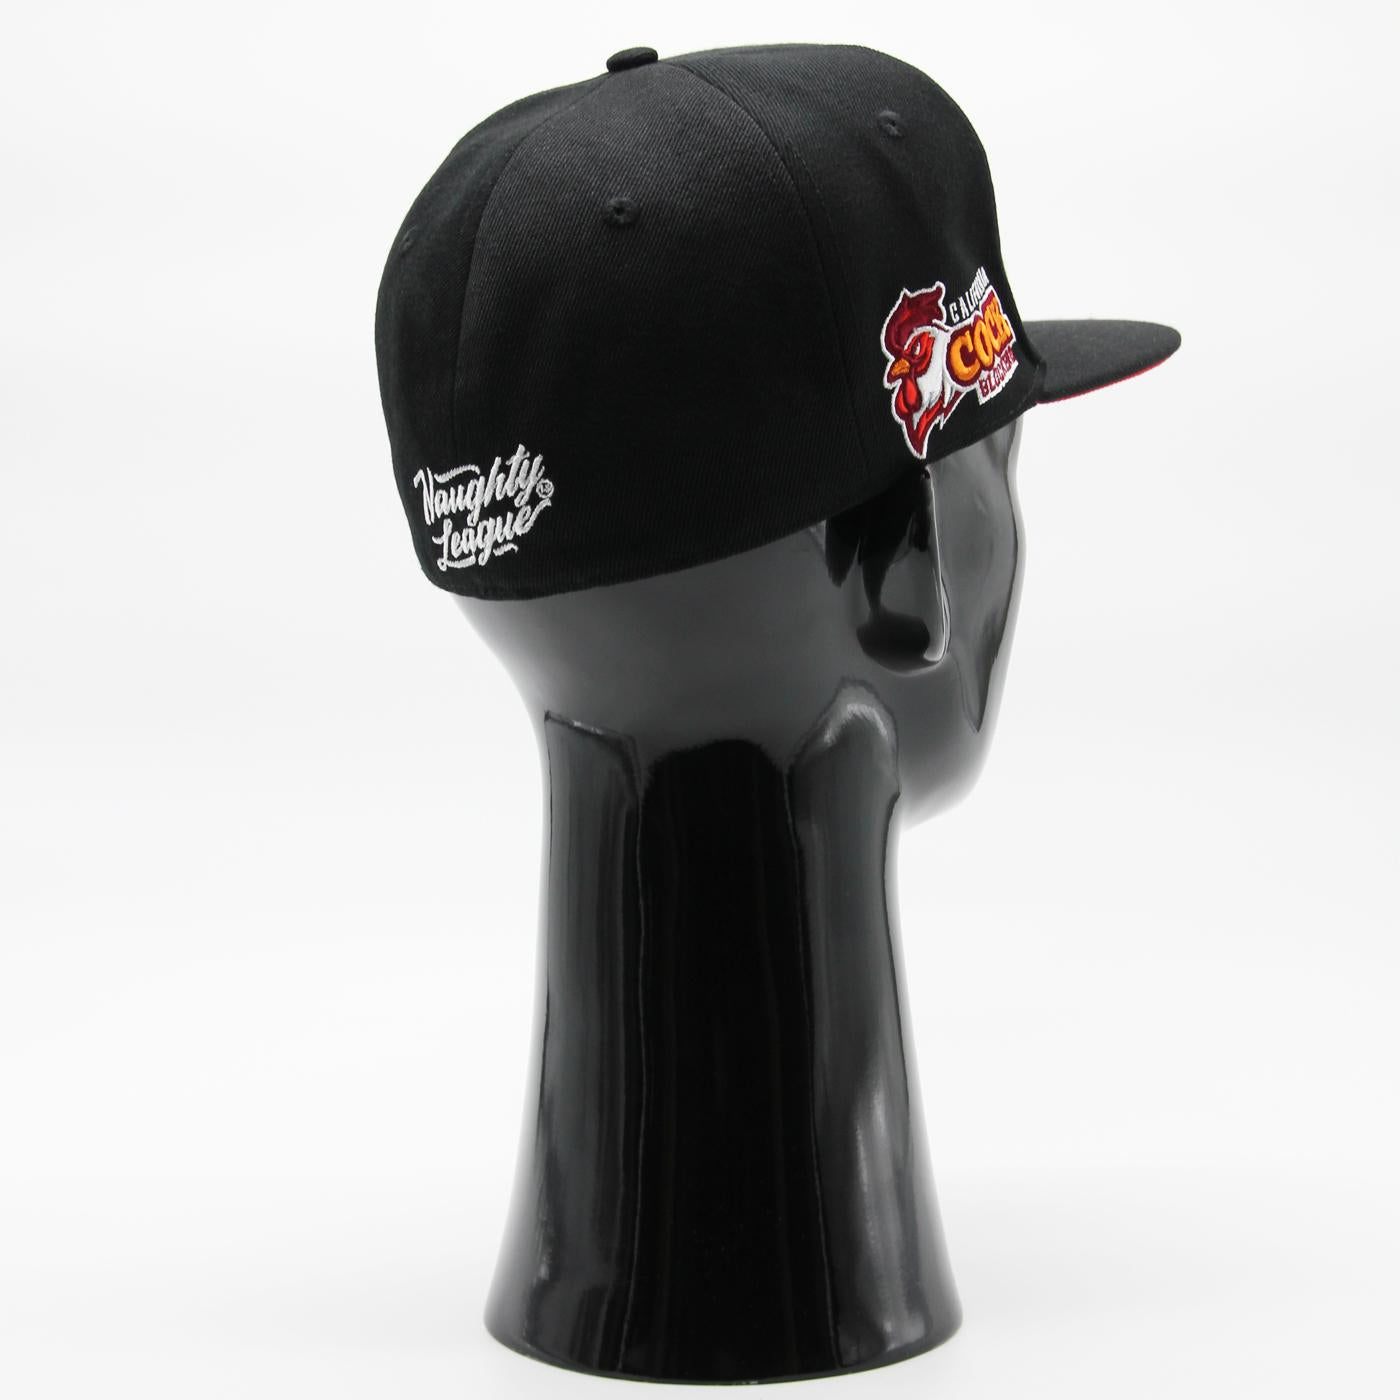 Naughty League California Cock Blocks Letter Logo fitted blk/red - Shop-Tetuan